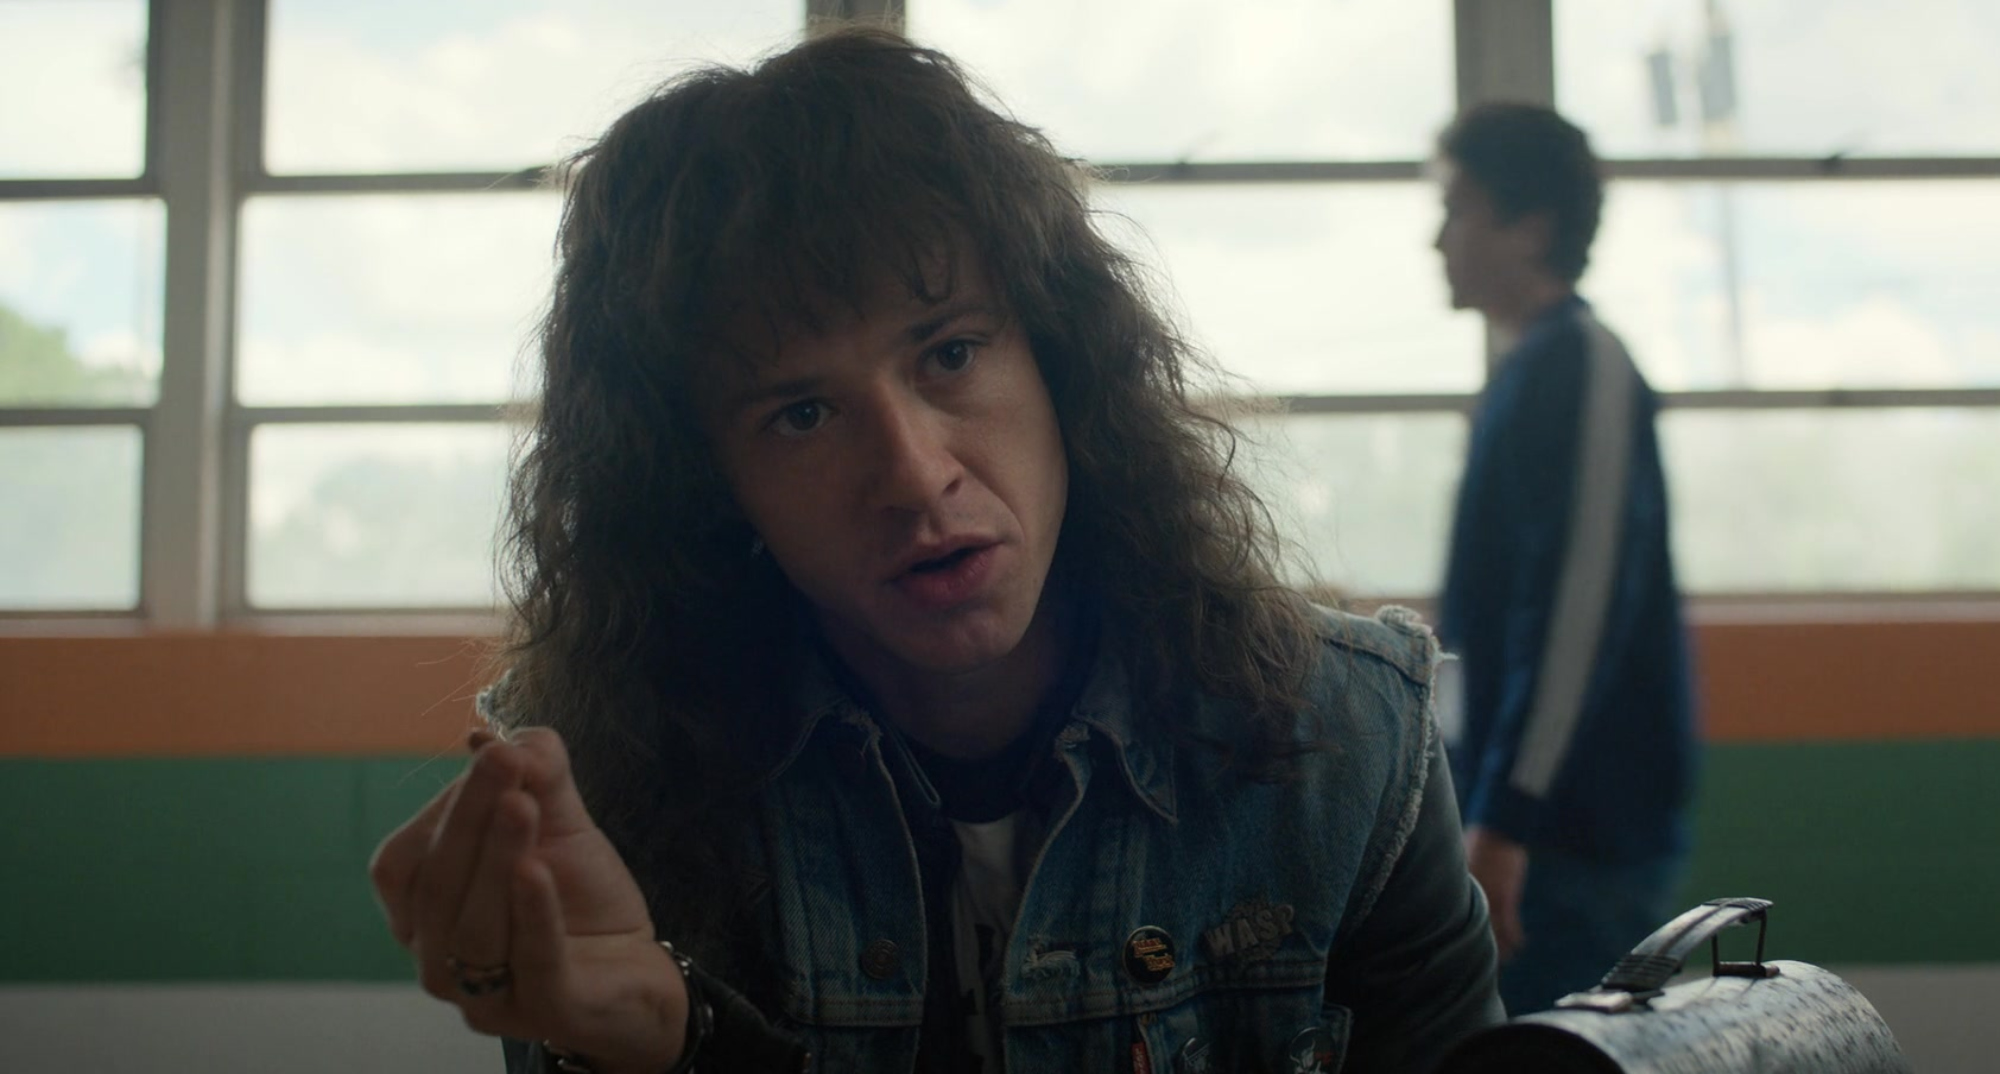 Stranger Things 4 did Eddie Munson dirty, but the actor